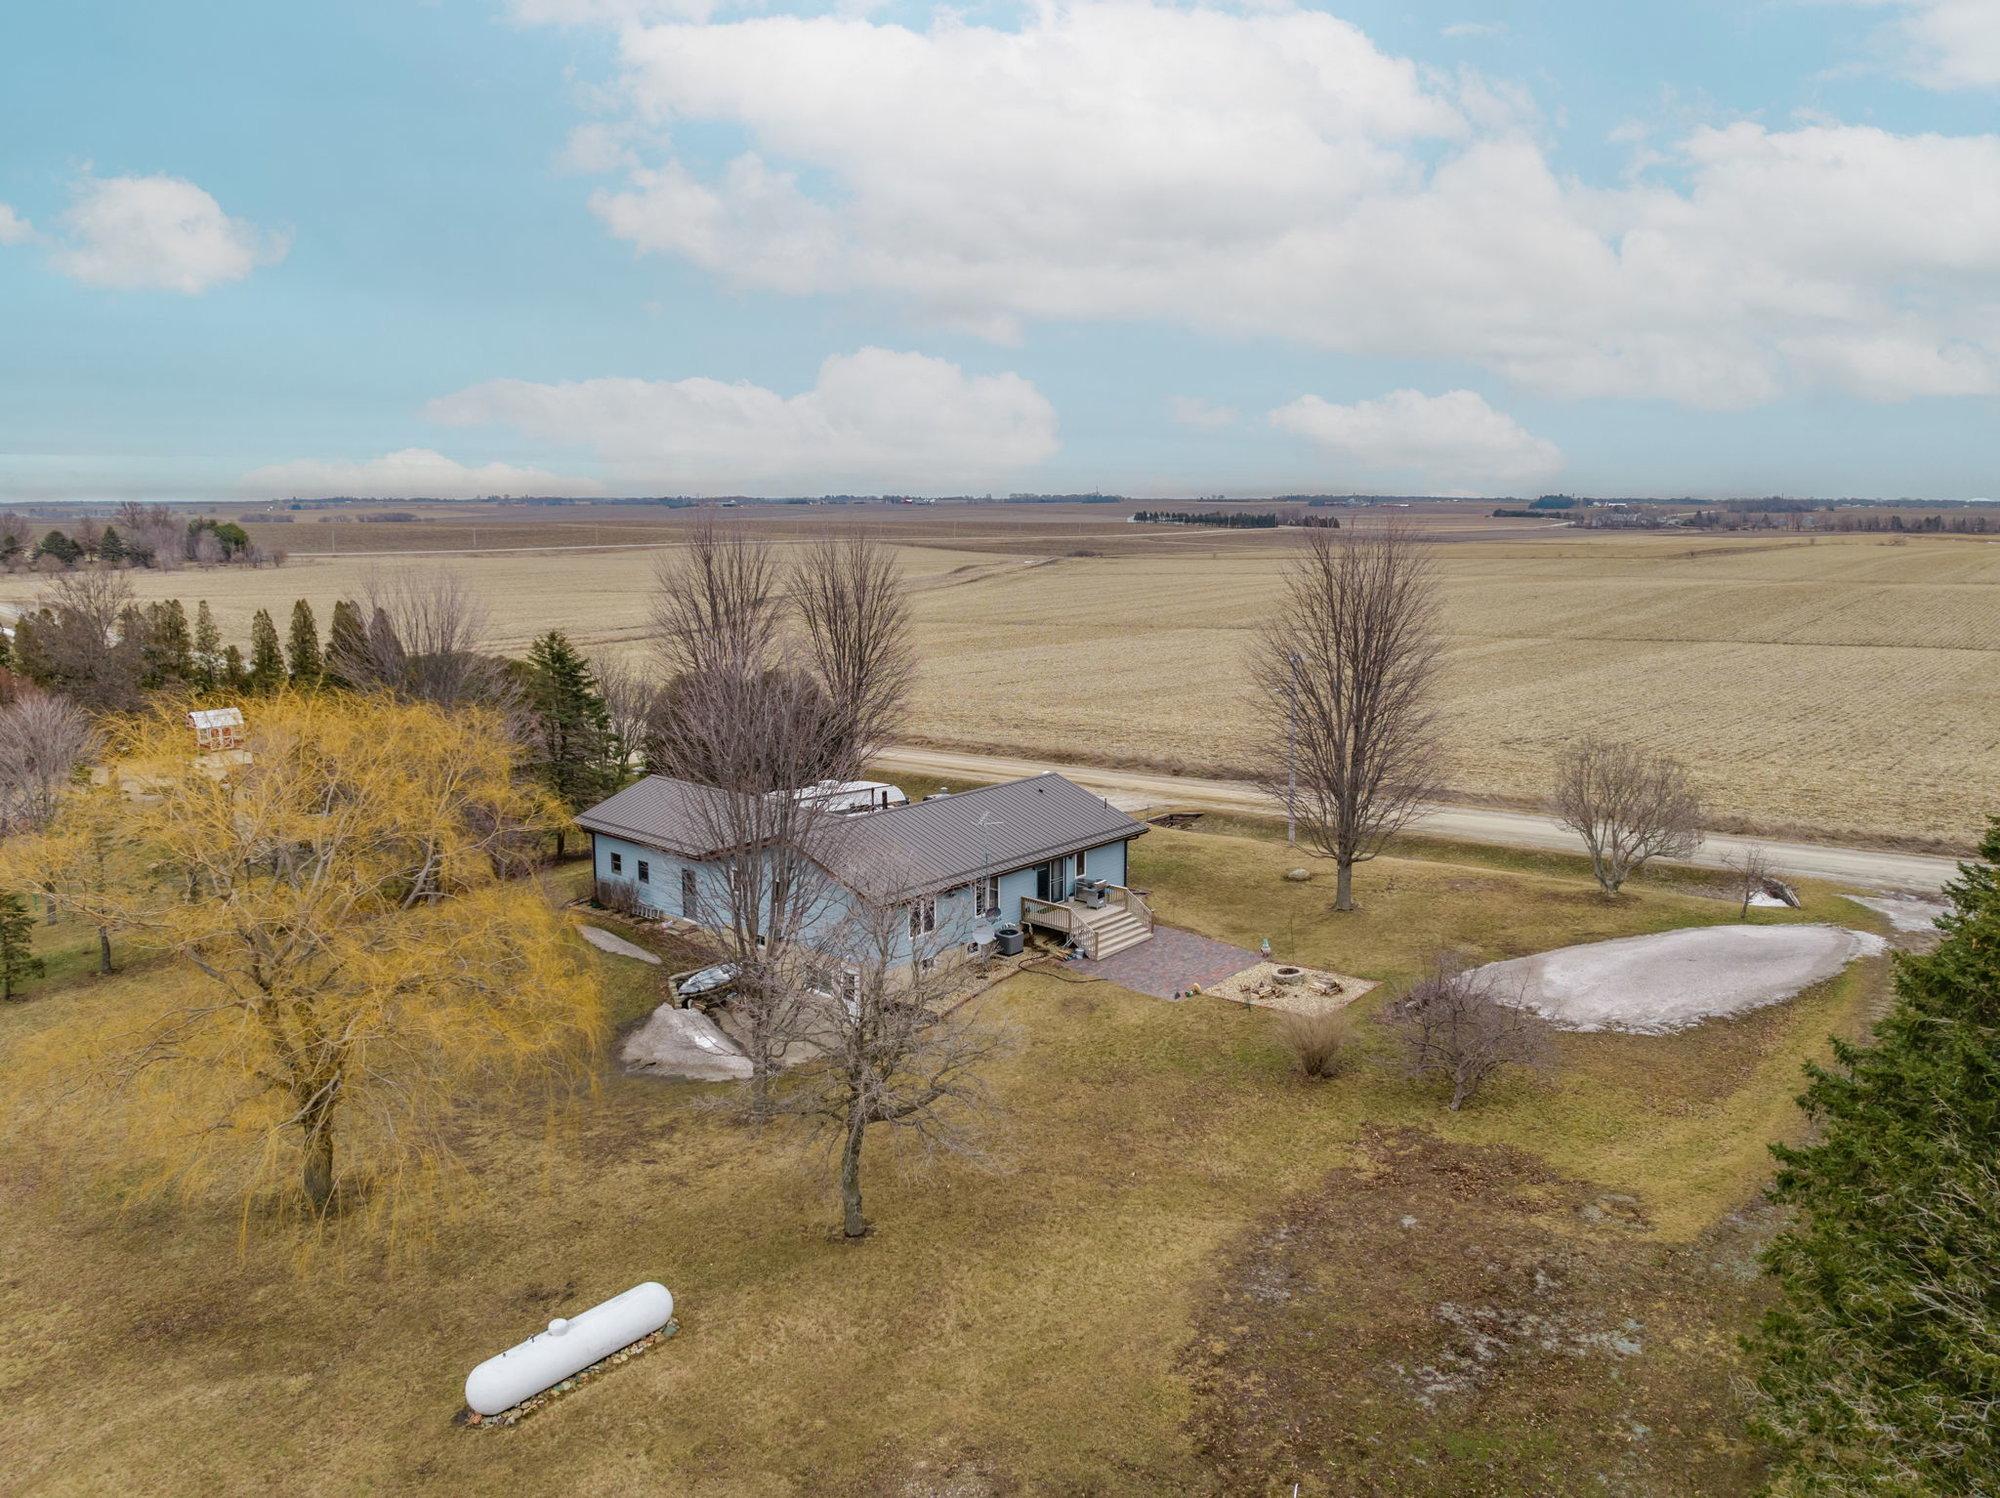 A Rare Opportunity to Own an Acreage Within Minutes of Cedar Falls Iowa